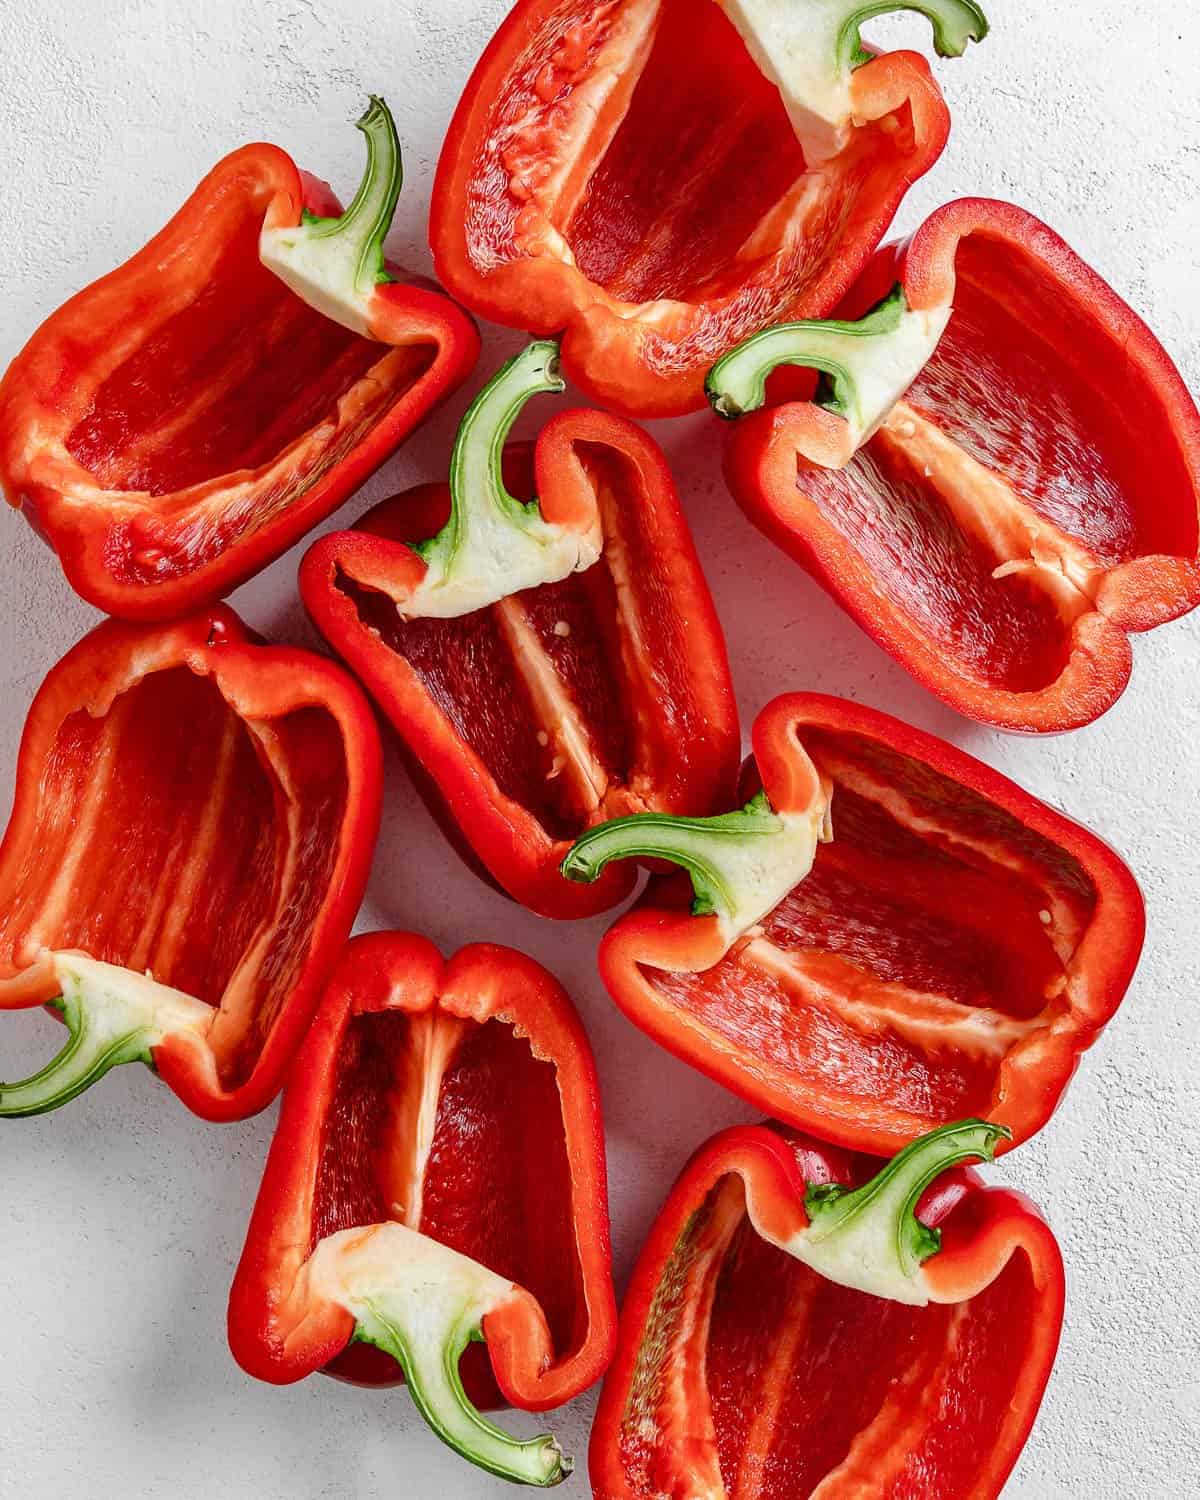 8 halved red peppers on a white surface